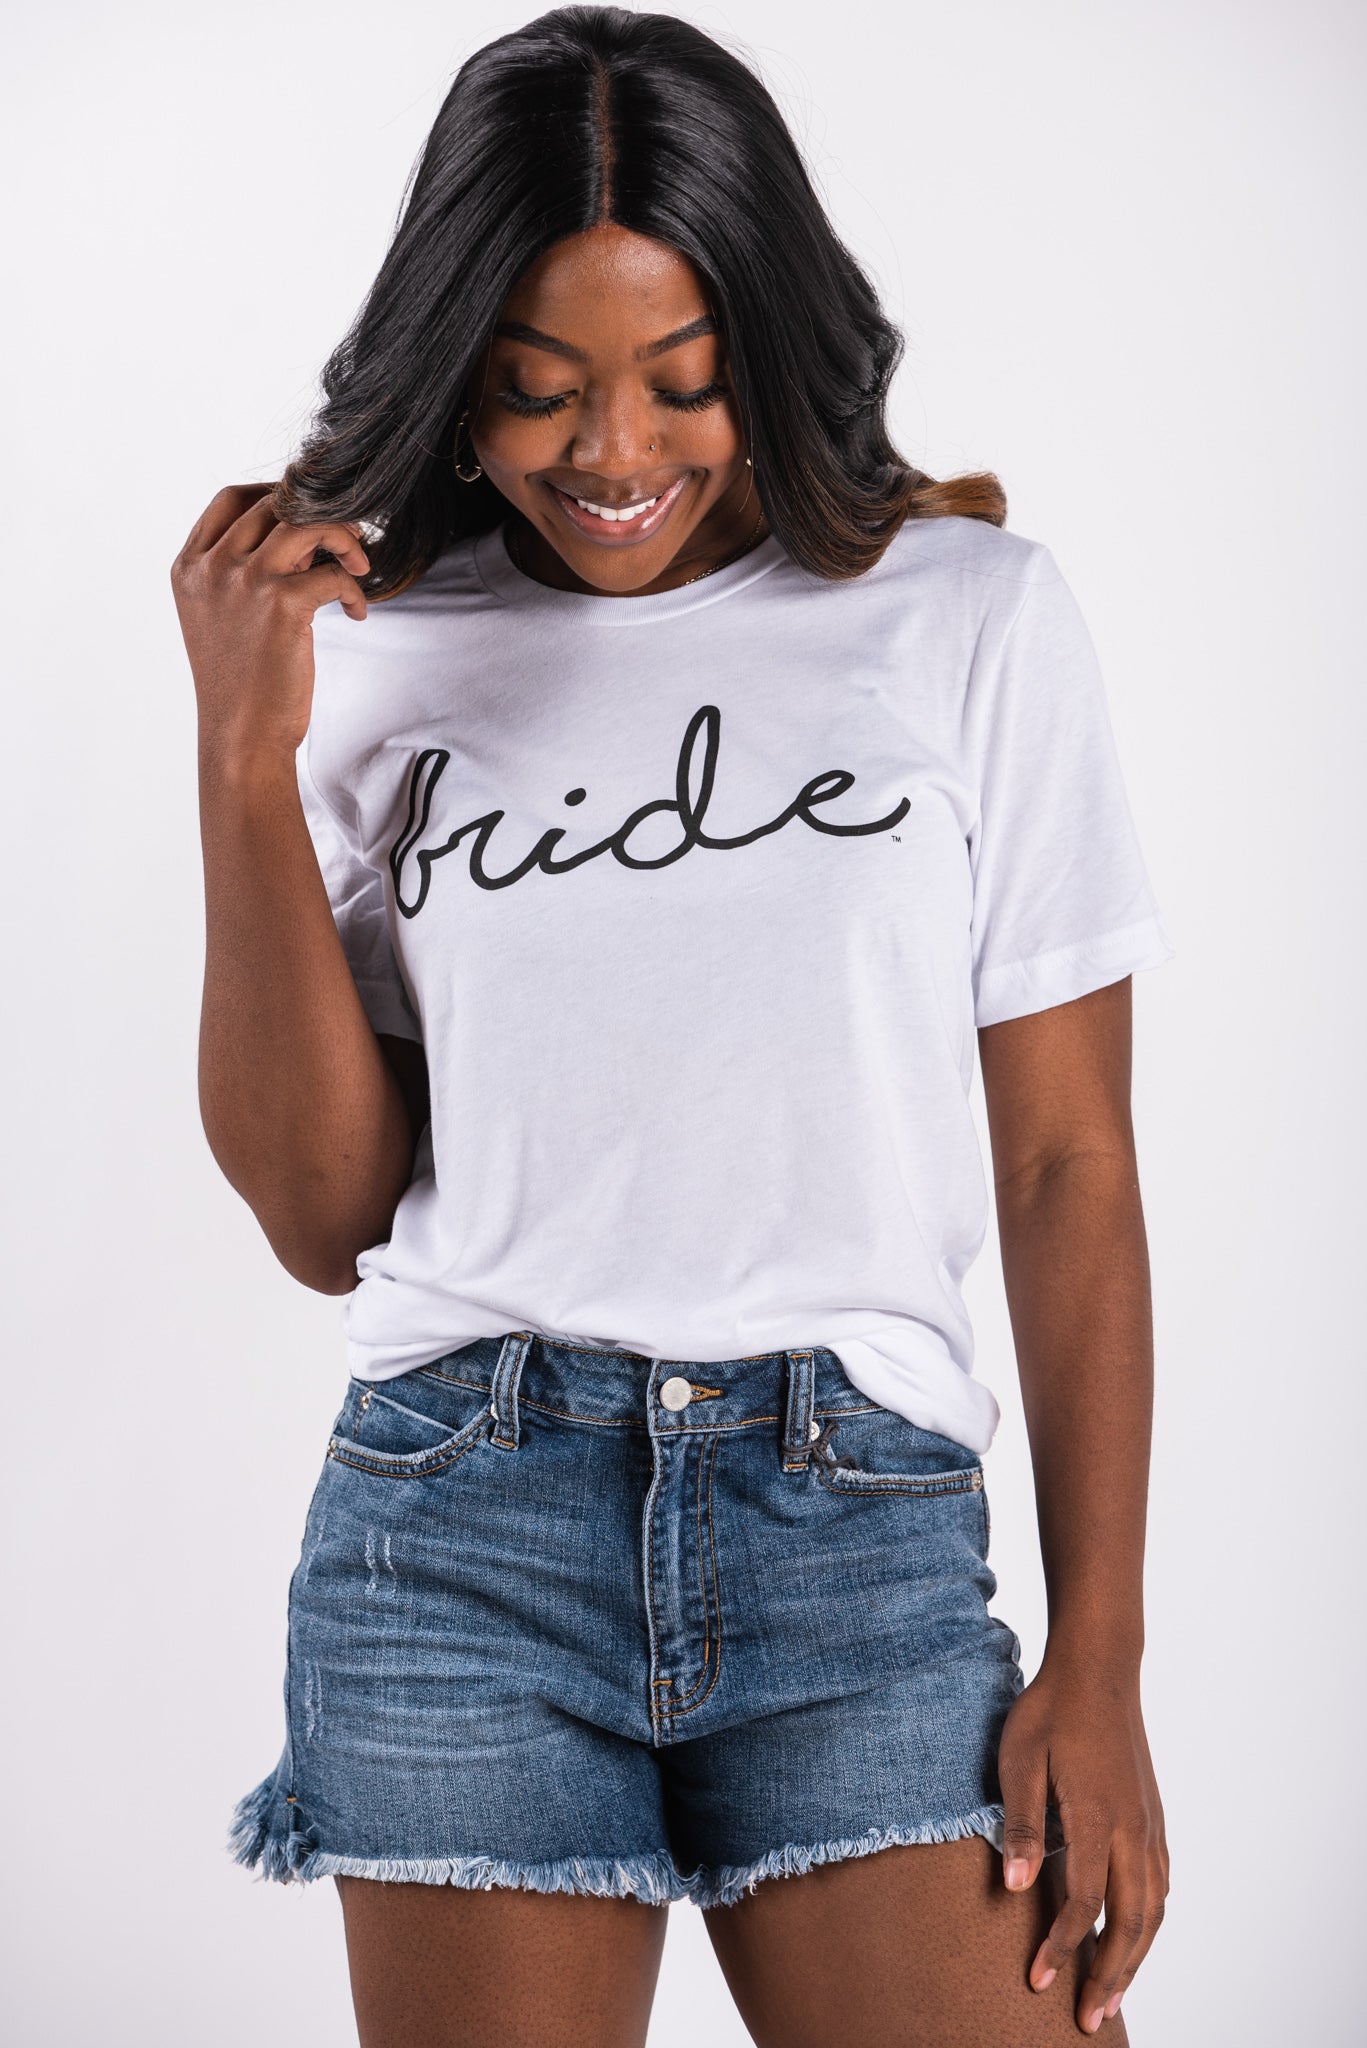 Bride pride script crew neck t-shirt white - Cute T-shirts - Funny T-Shirts at Lush Fashion Lounge Boutique in Oklahoma City